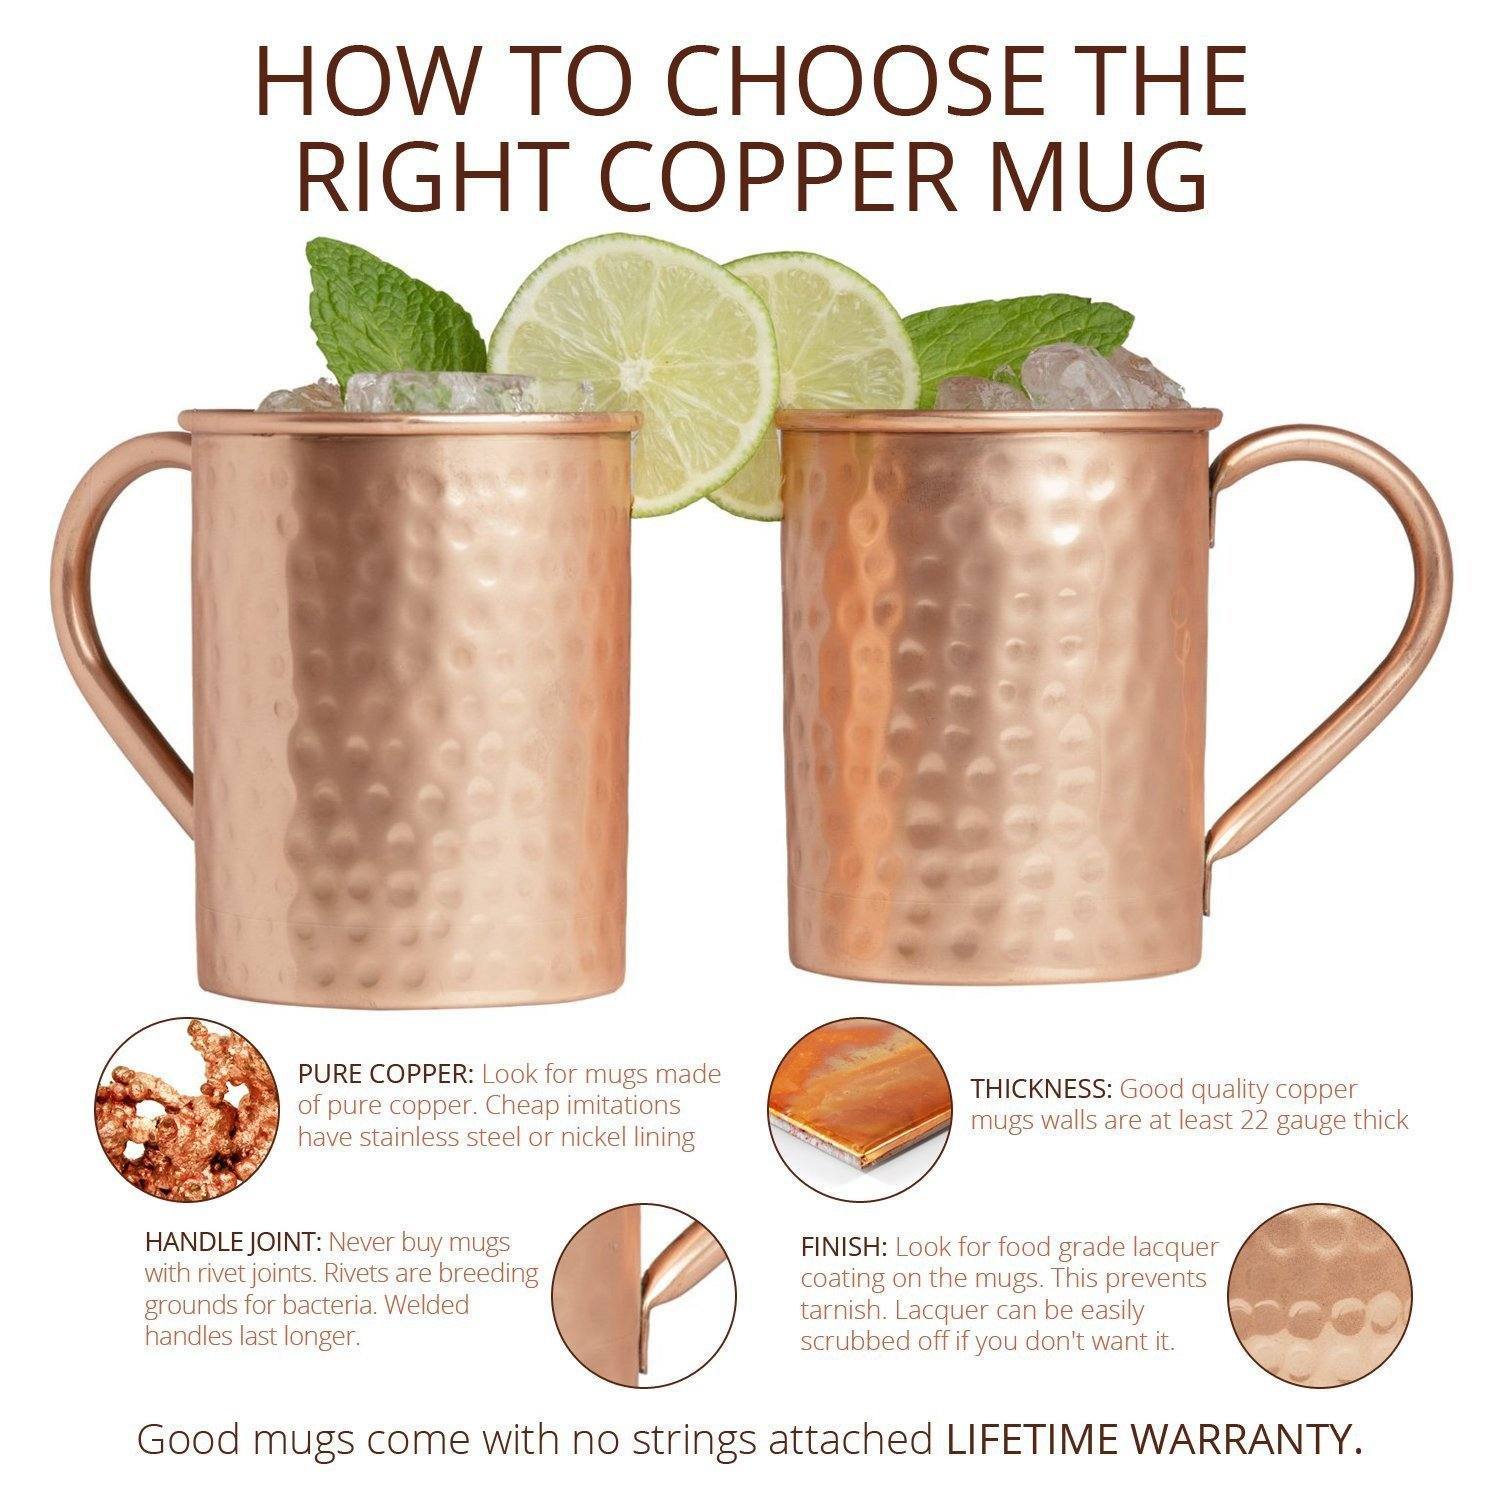  Advanced Mixology [Gift Set] Mule Science Moscow Mule Mugs Set  of 4 (19 oz. large size), 100% Handcrafted, Food Safe, Copper Mugs  w/Accessories